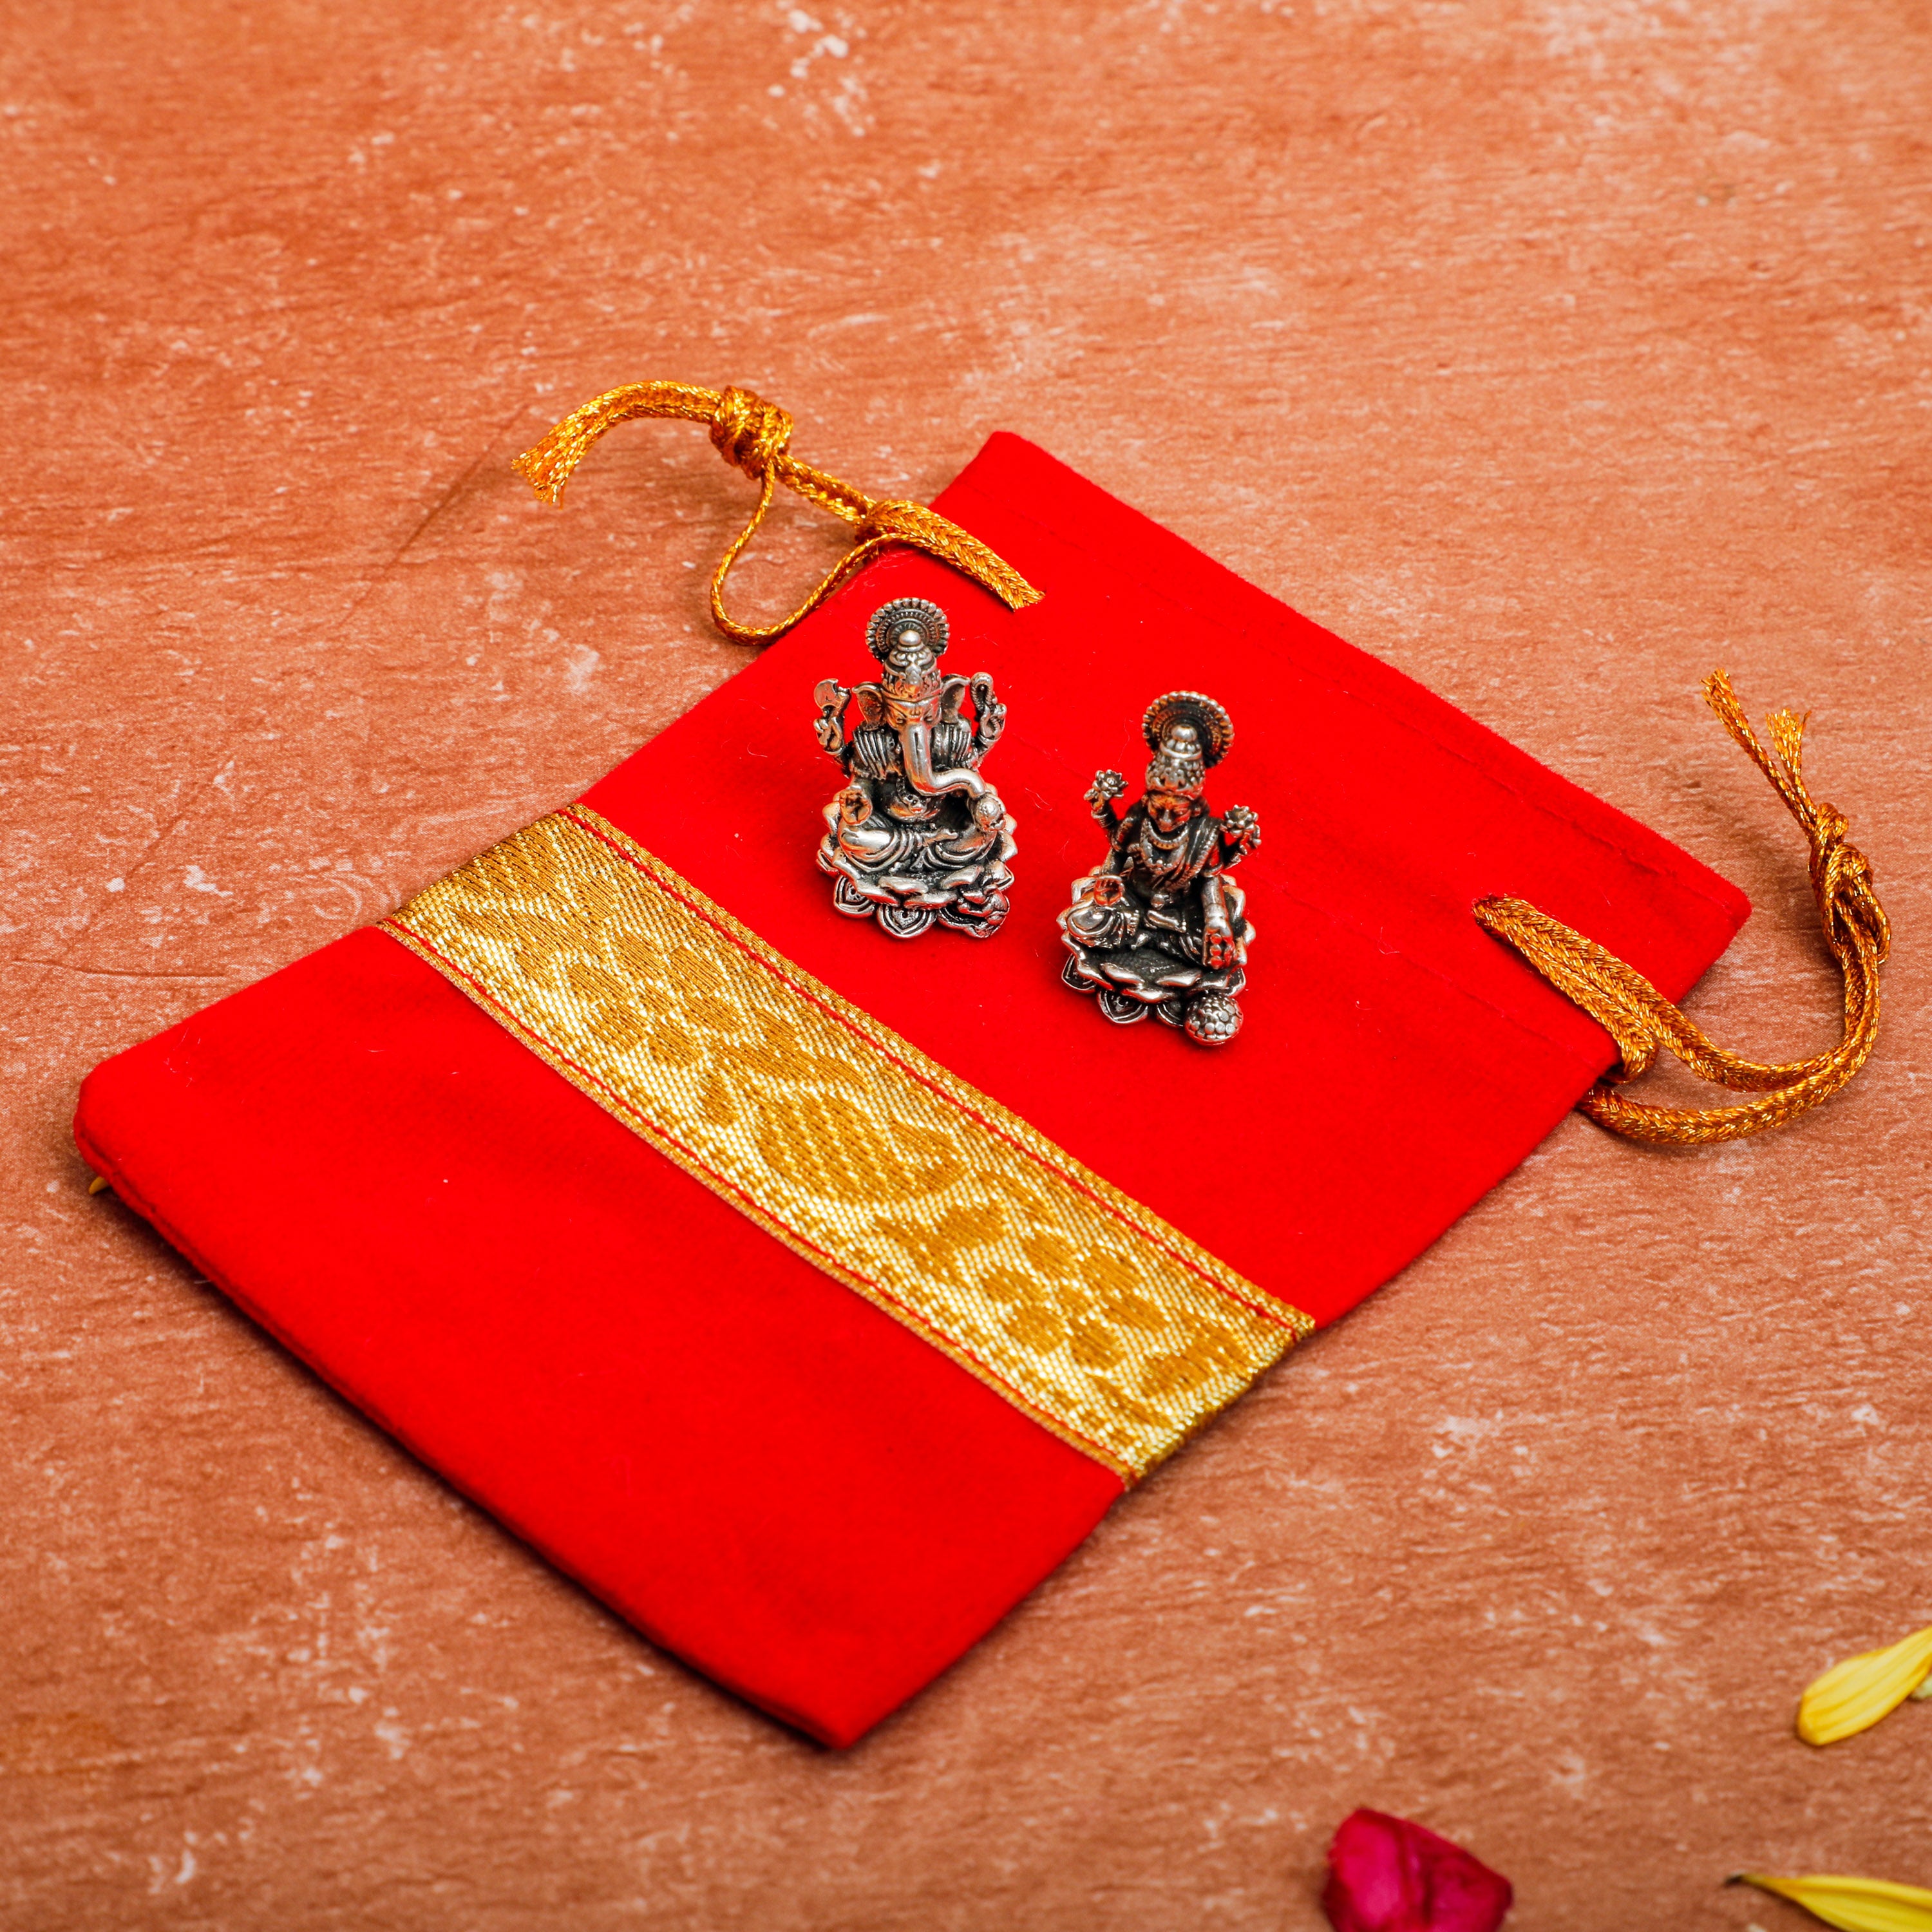 Pure silver idols placed on the velvet pouch